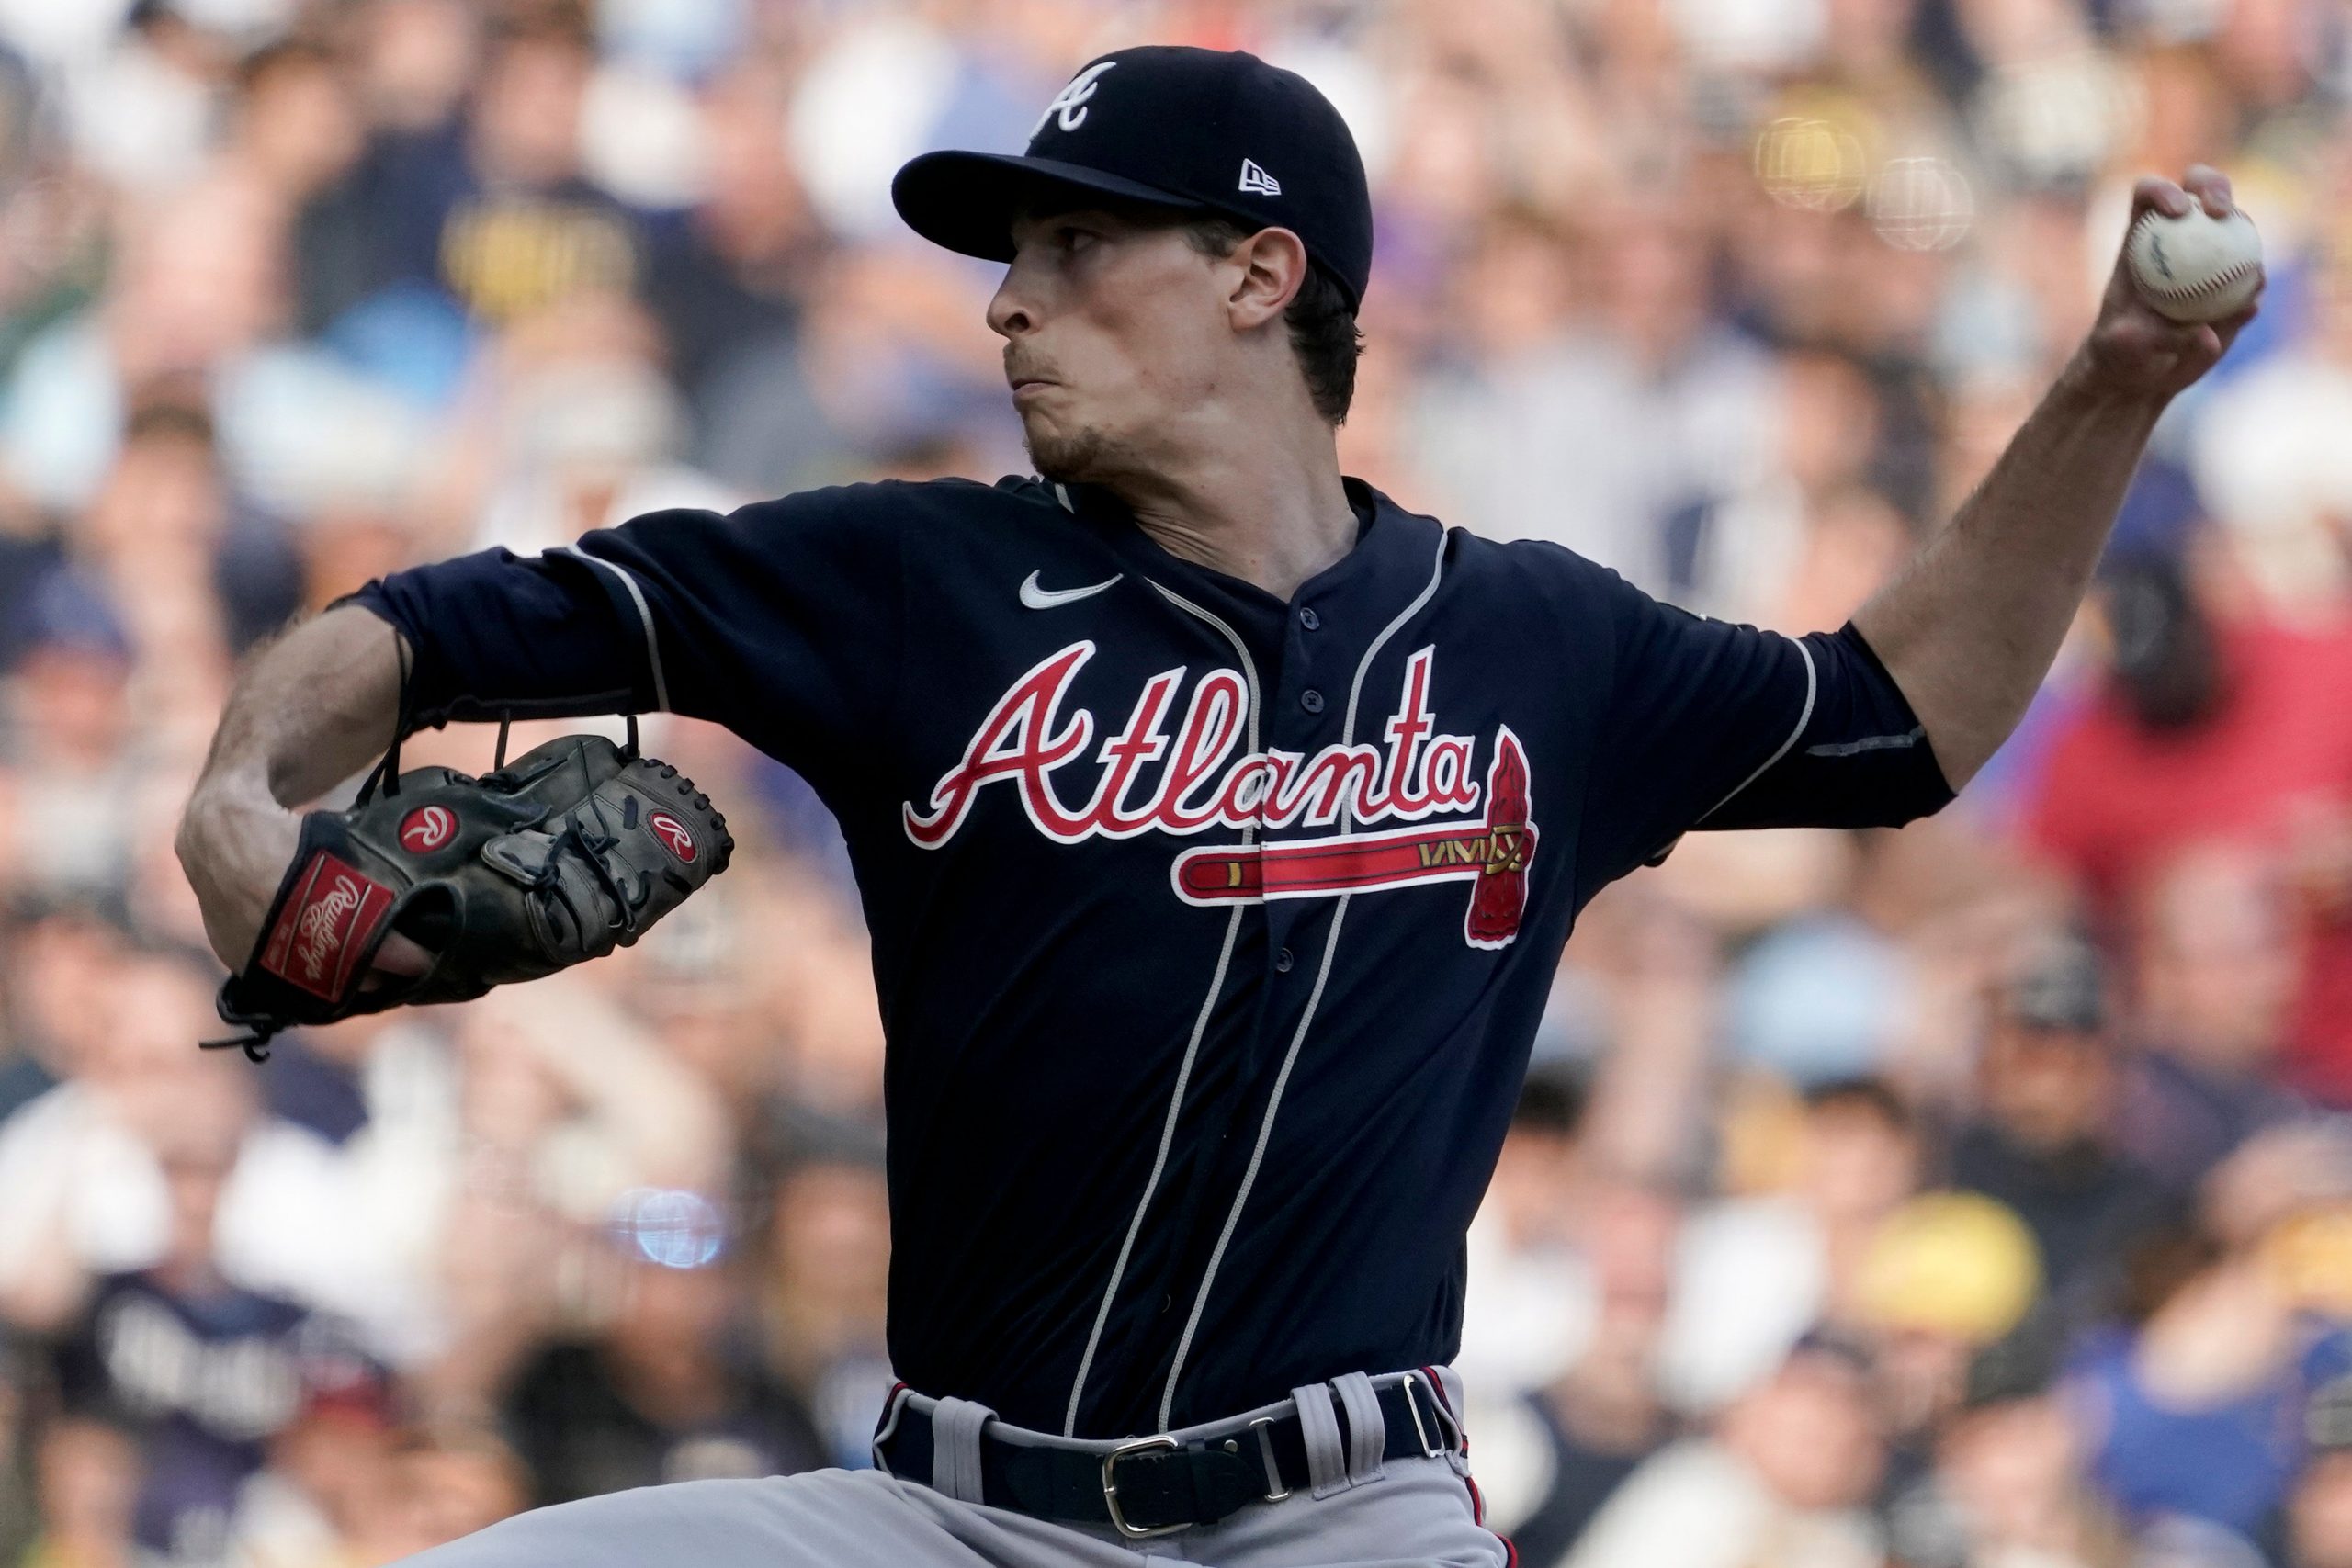 MLB: Max Fried sharp as Braves blank Brewers 3-0 to tie NLDS at 1-1